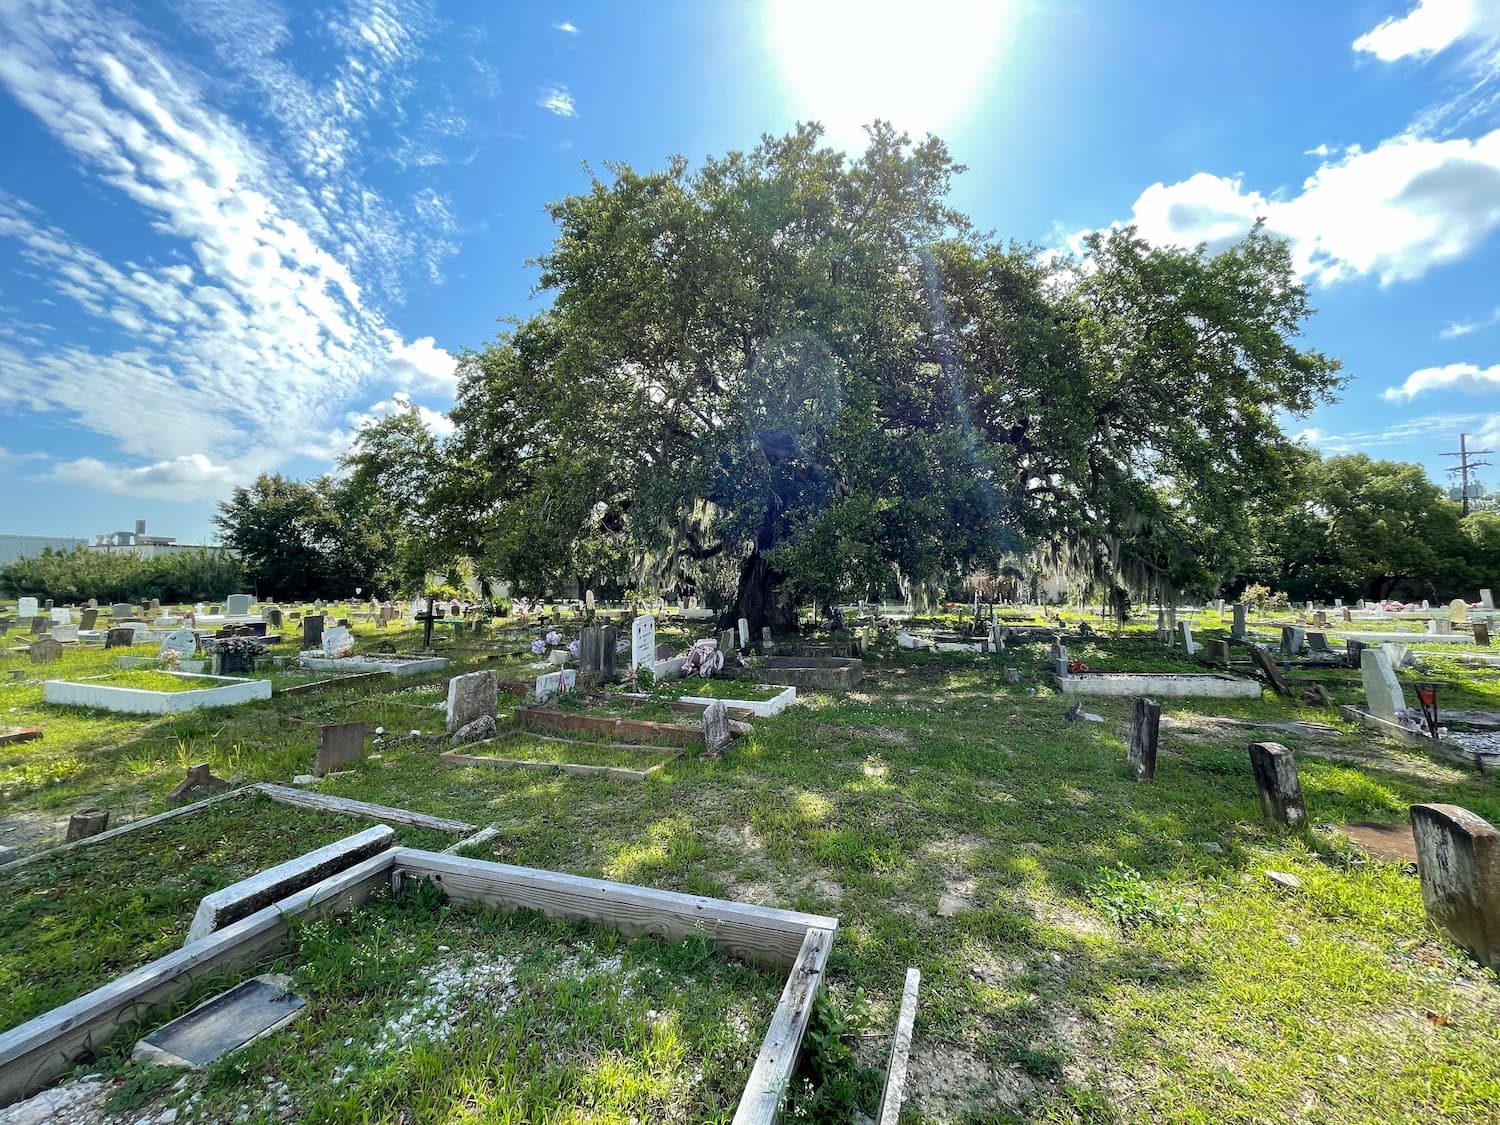 Graves at cemetary with giant old tree